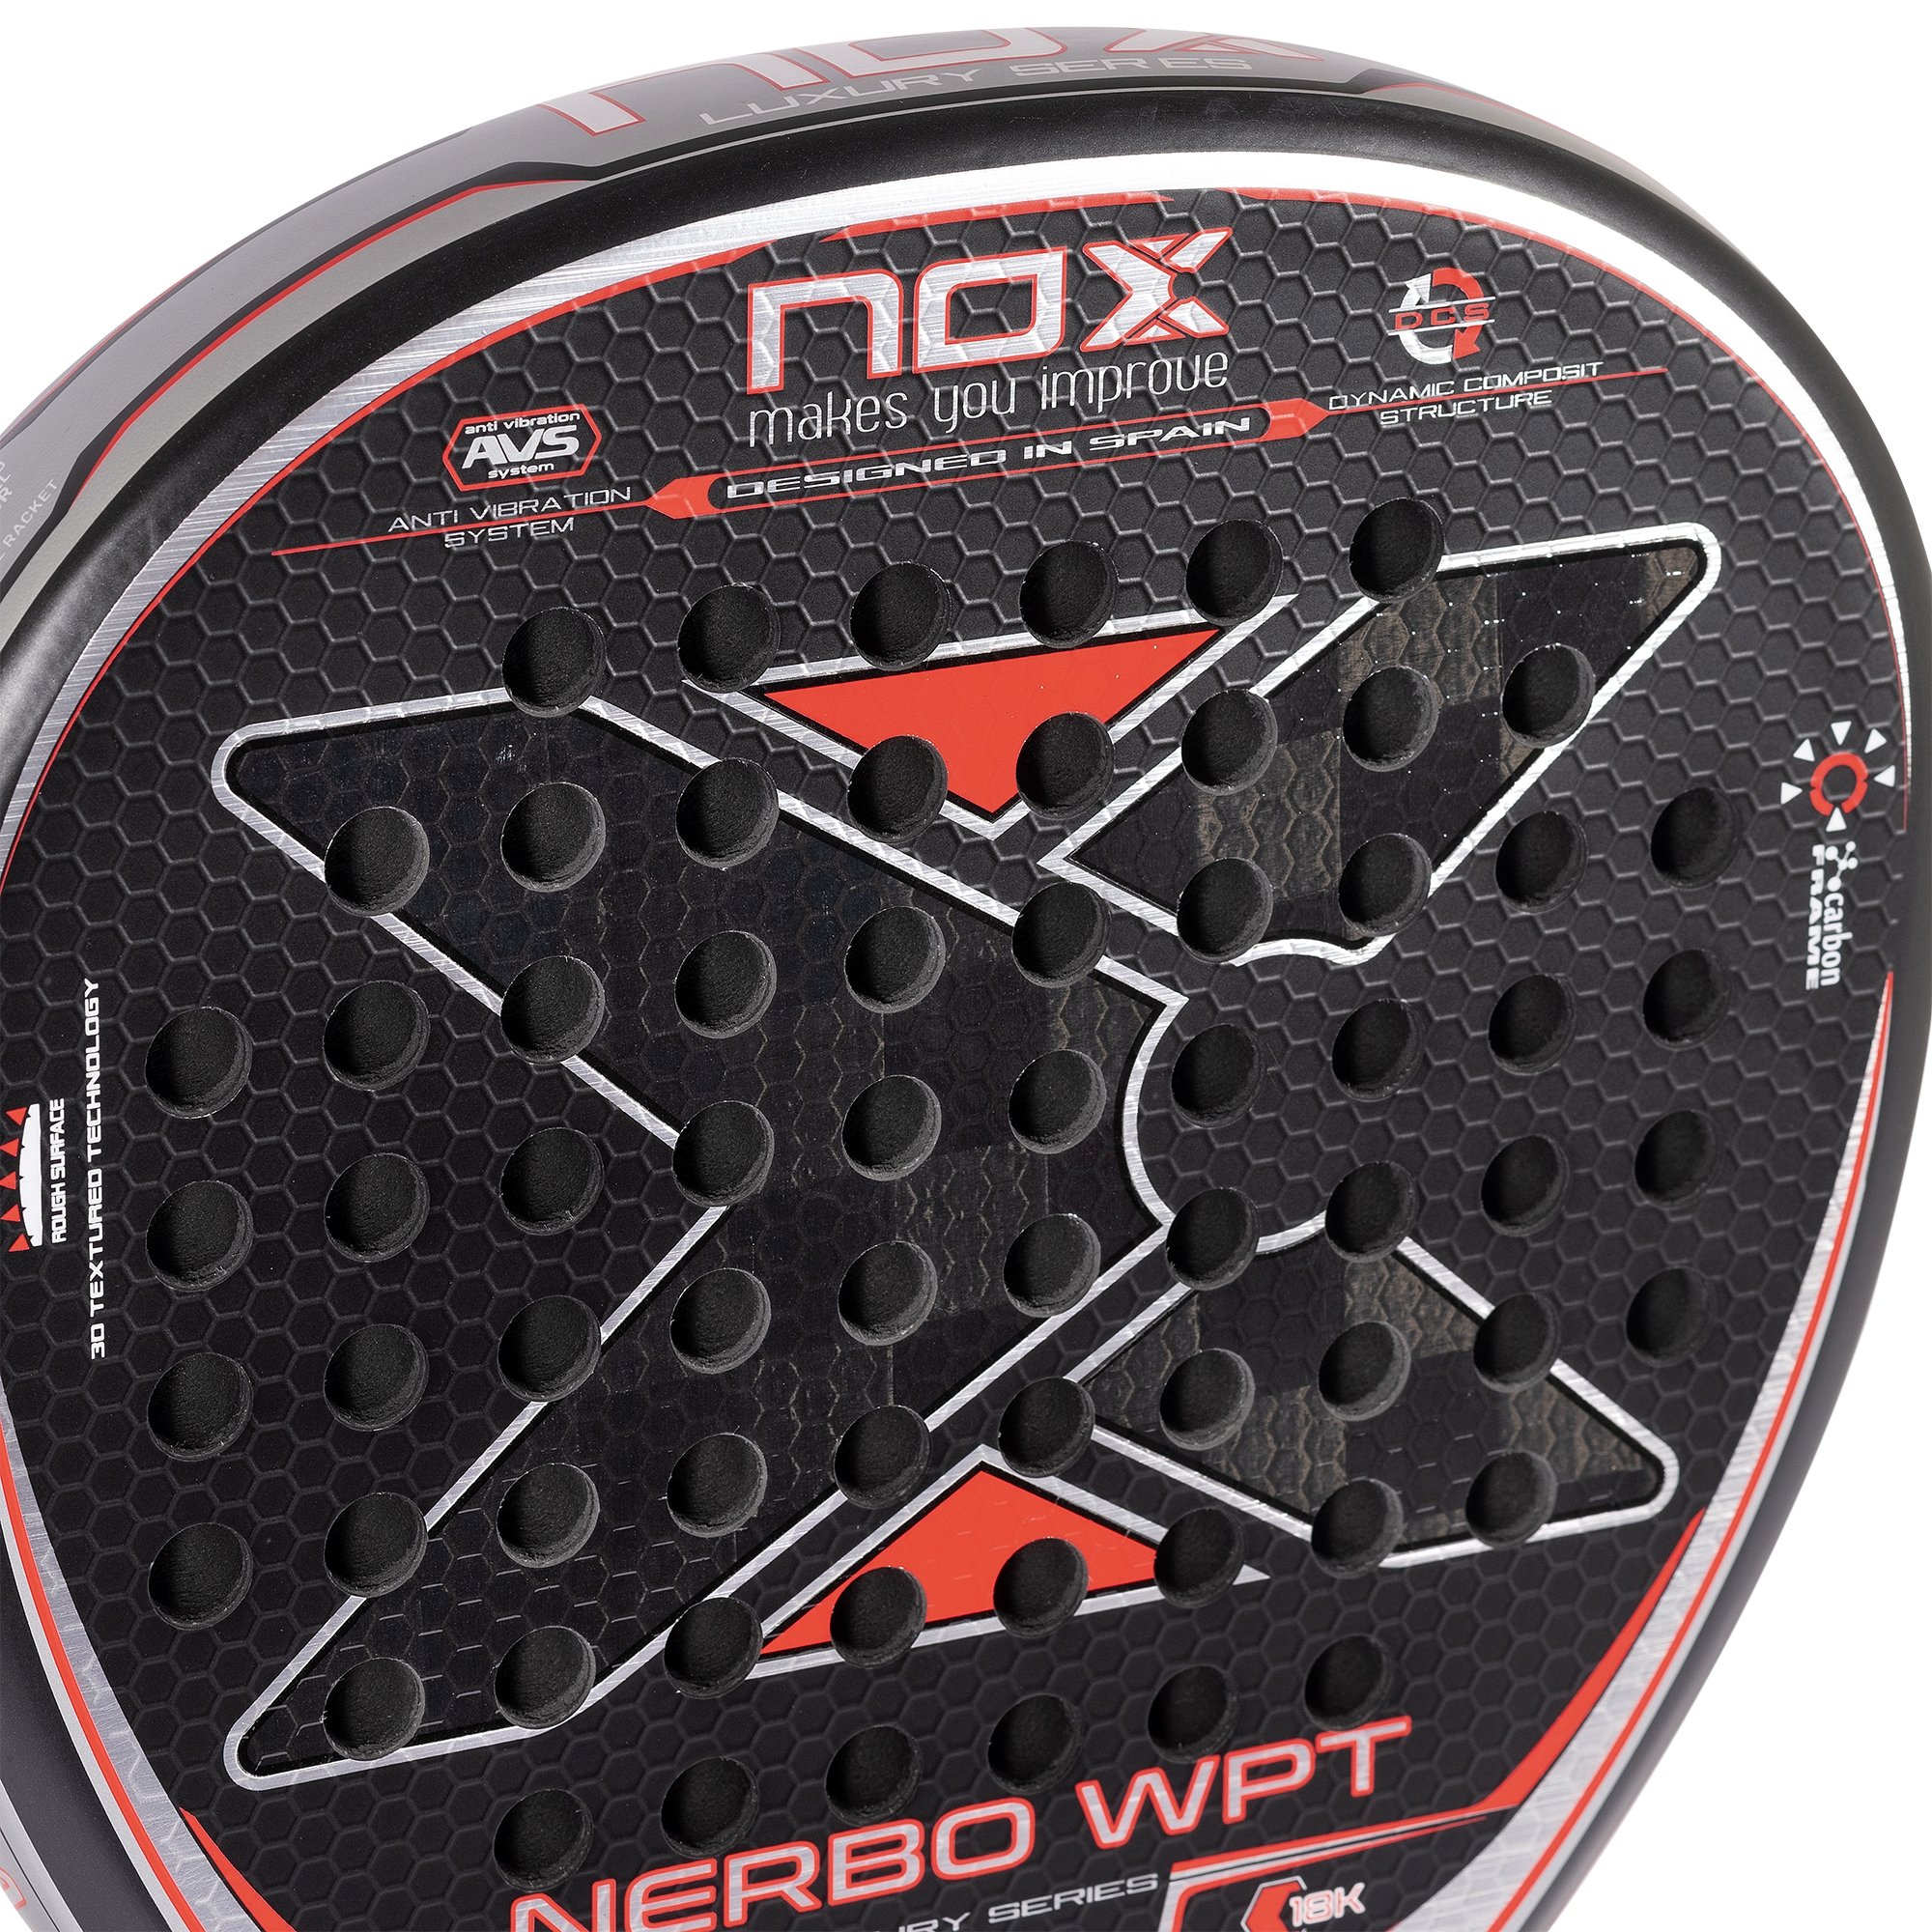 NERBO World Padel Tour Official Racket 2022